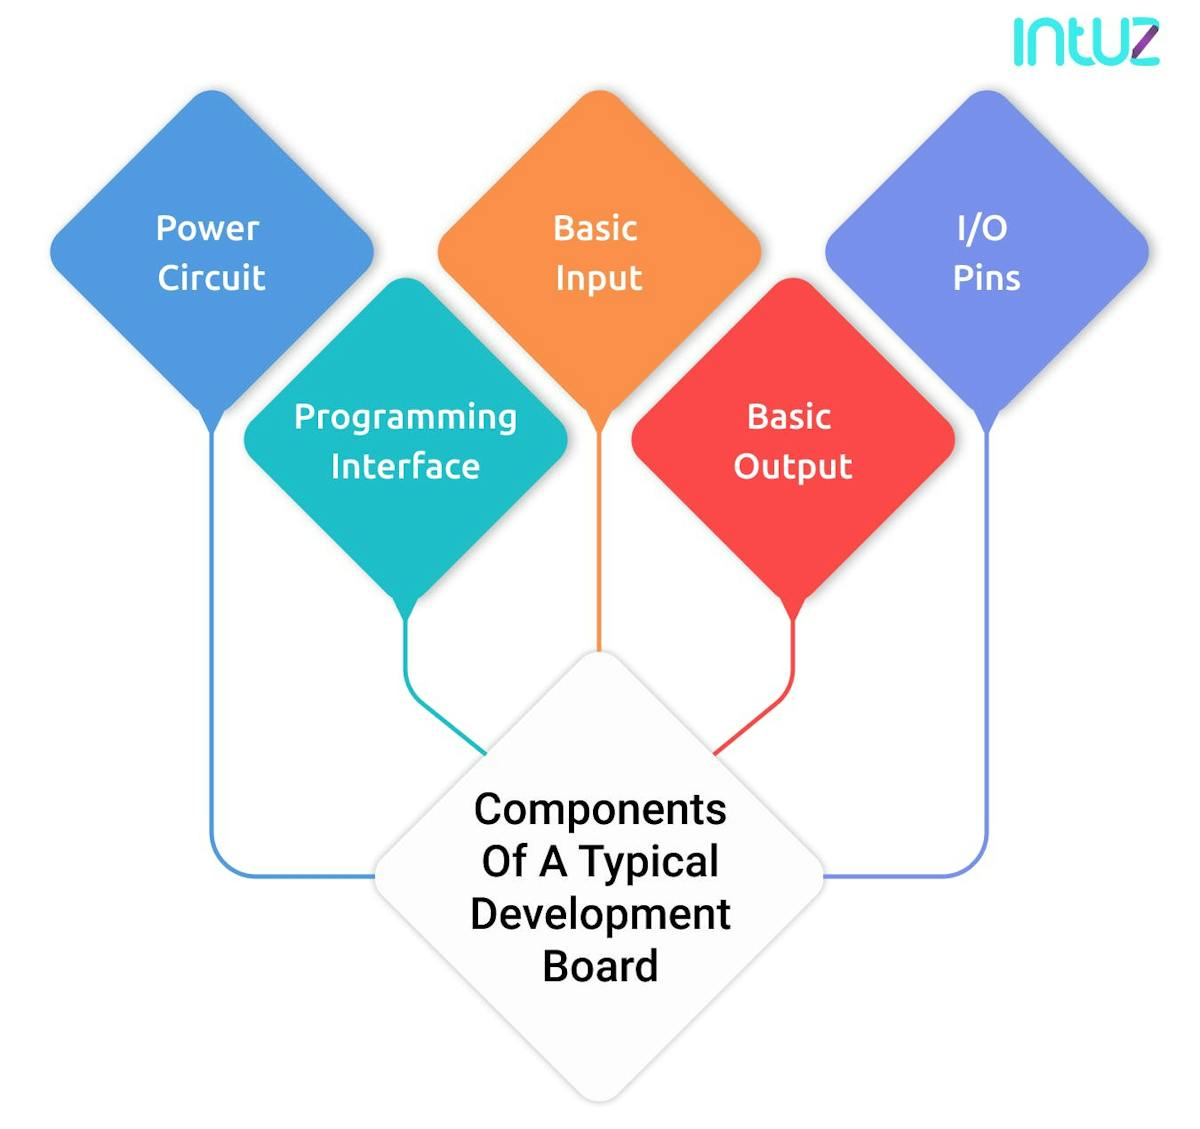 Components of a Typical Development Board